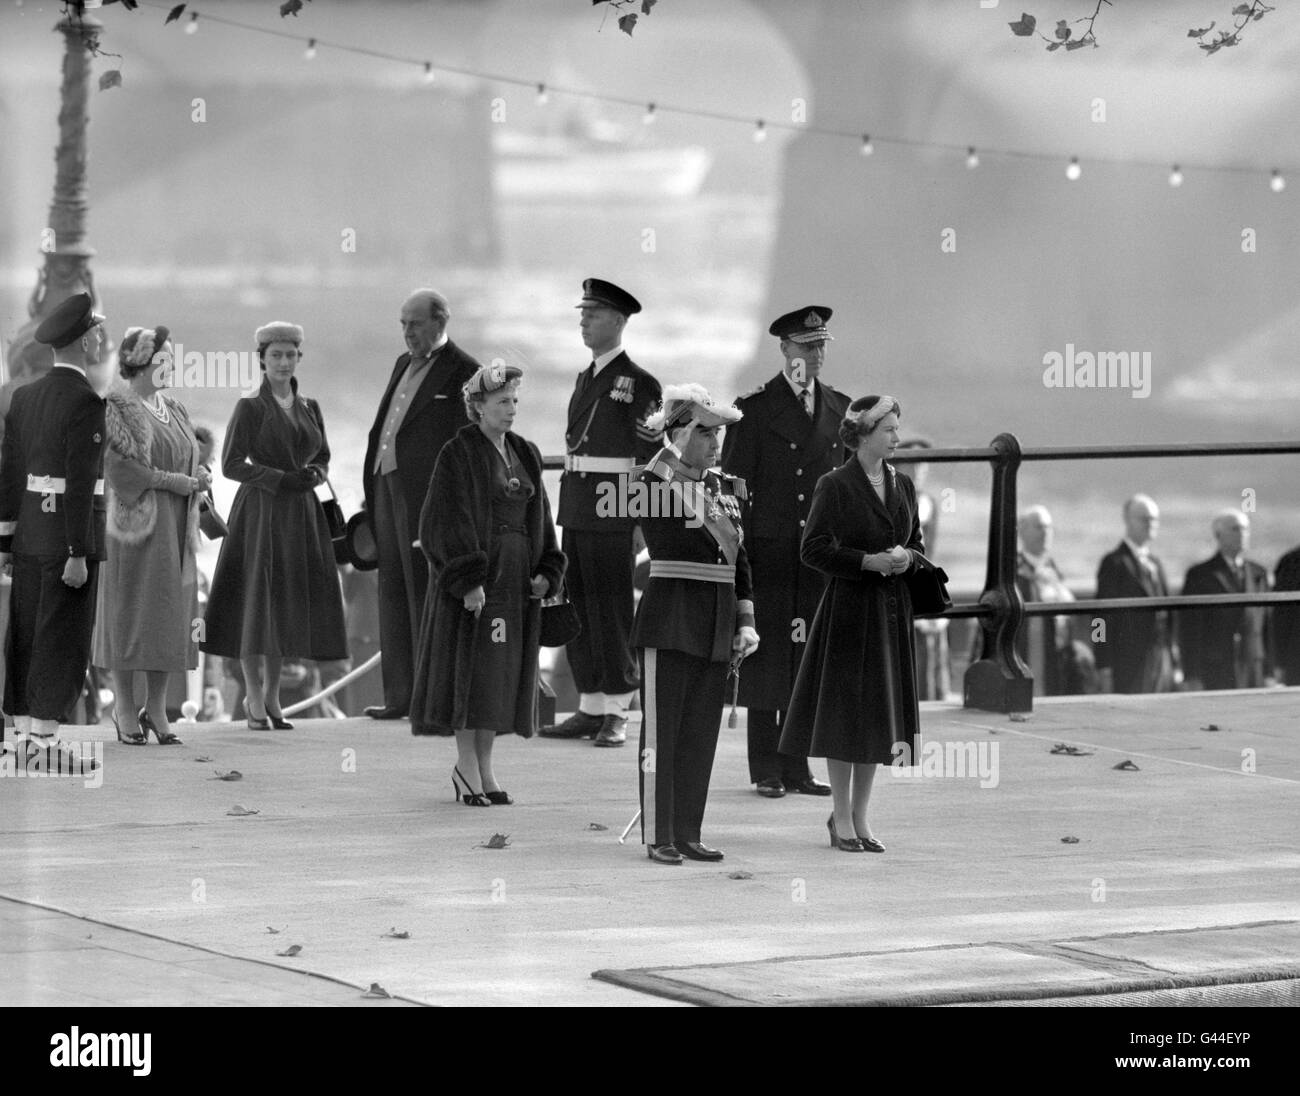 London had a Royal welcome for general Francisco Craveiro Lopes, President of Portugal, Britain's oldest ally, on his arrival at Westminster Pier for his state visit. With Queen Elizabeth II, General Lopes stands at the salute as the national anthems are played. With them are Senhora Dona Berta Craveiro Lopes, the Duke of Edinburgh, Princess Margaret, the Queen Mother and, in the background, Lord Waverley. Stock Photo